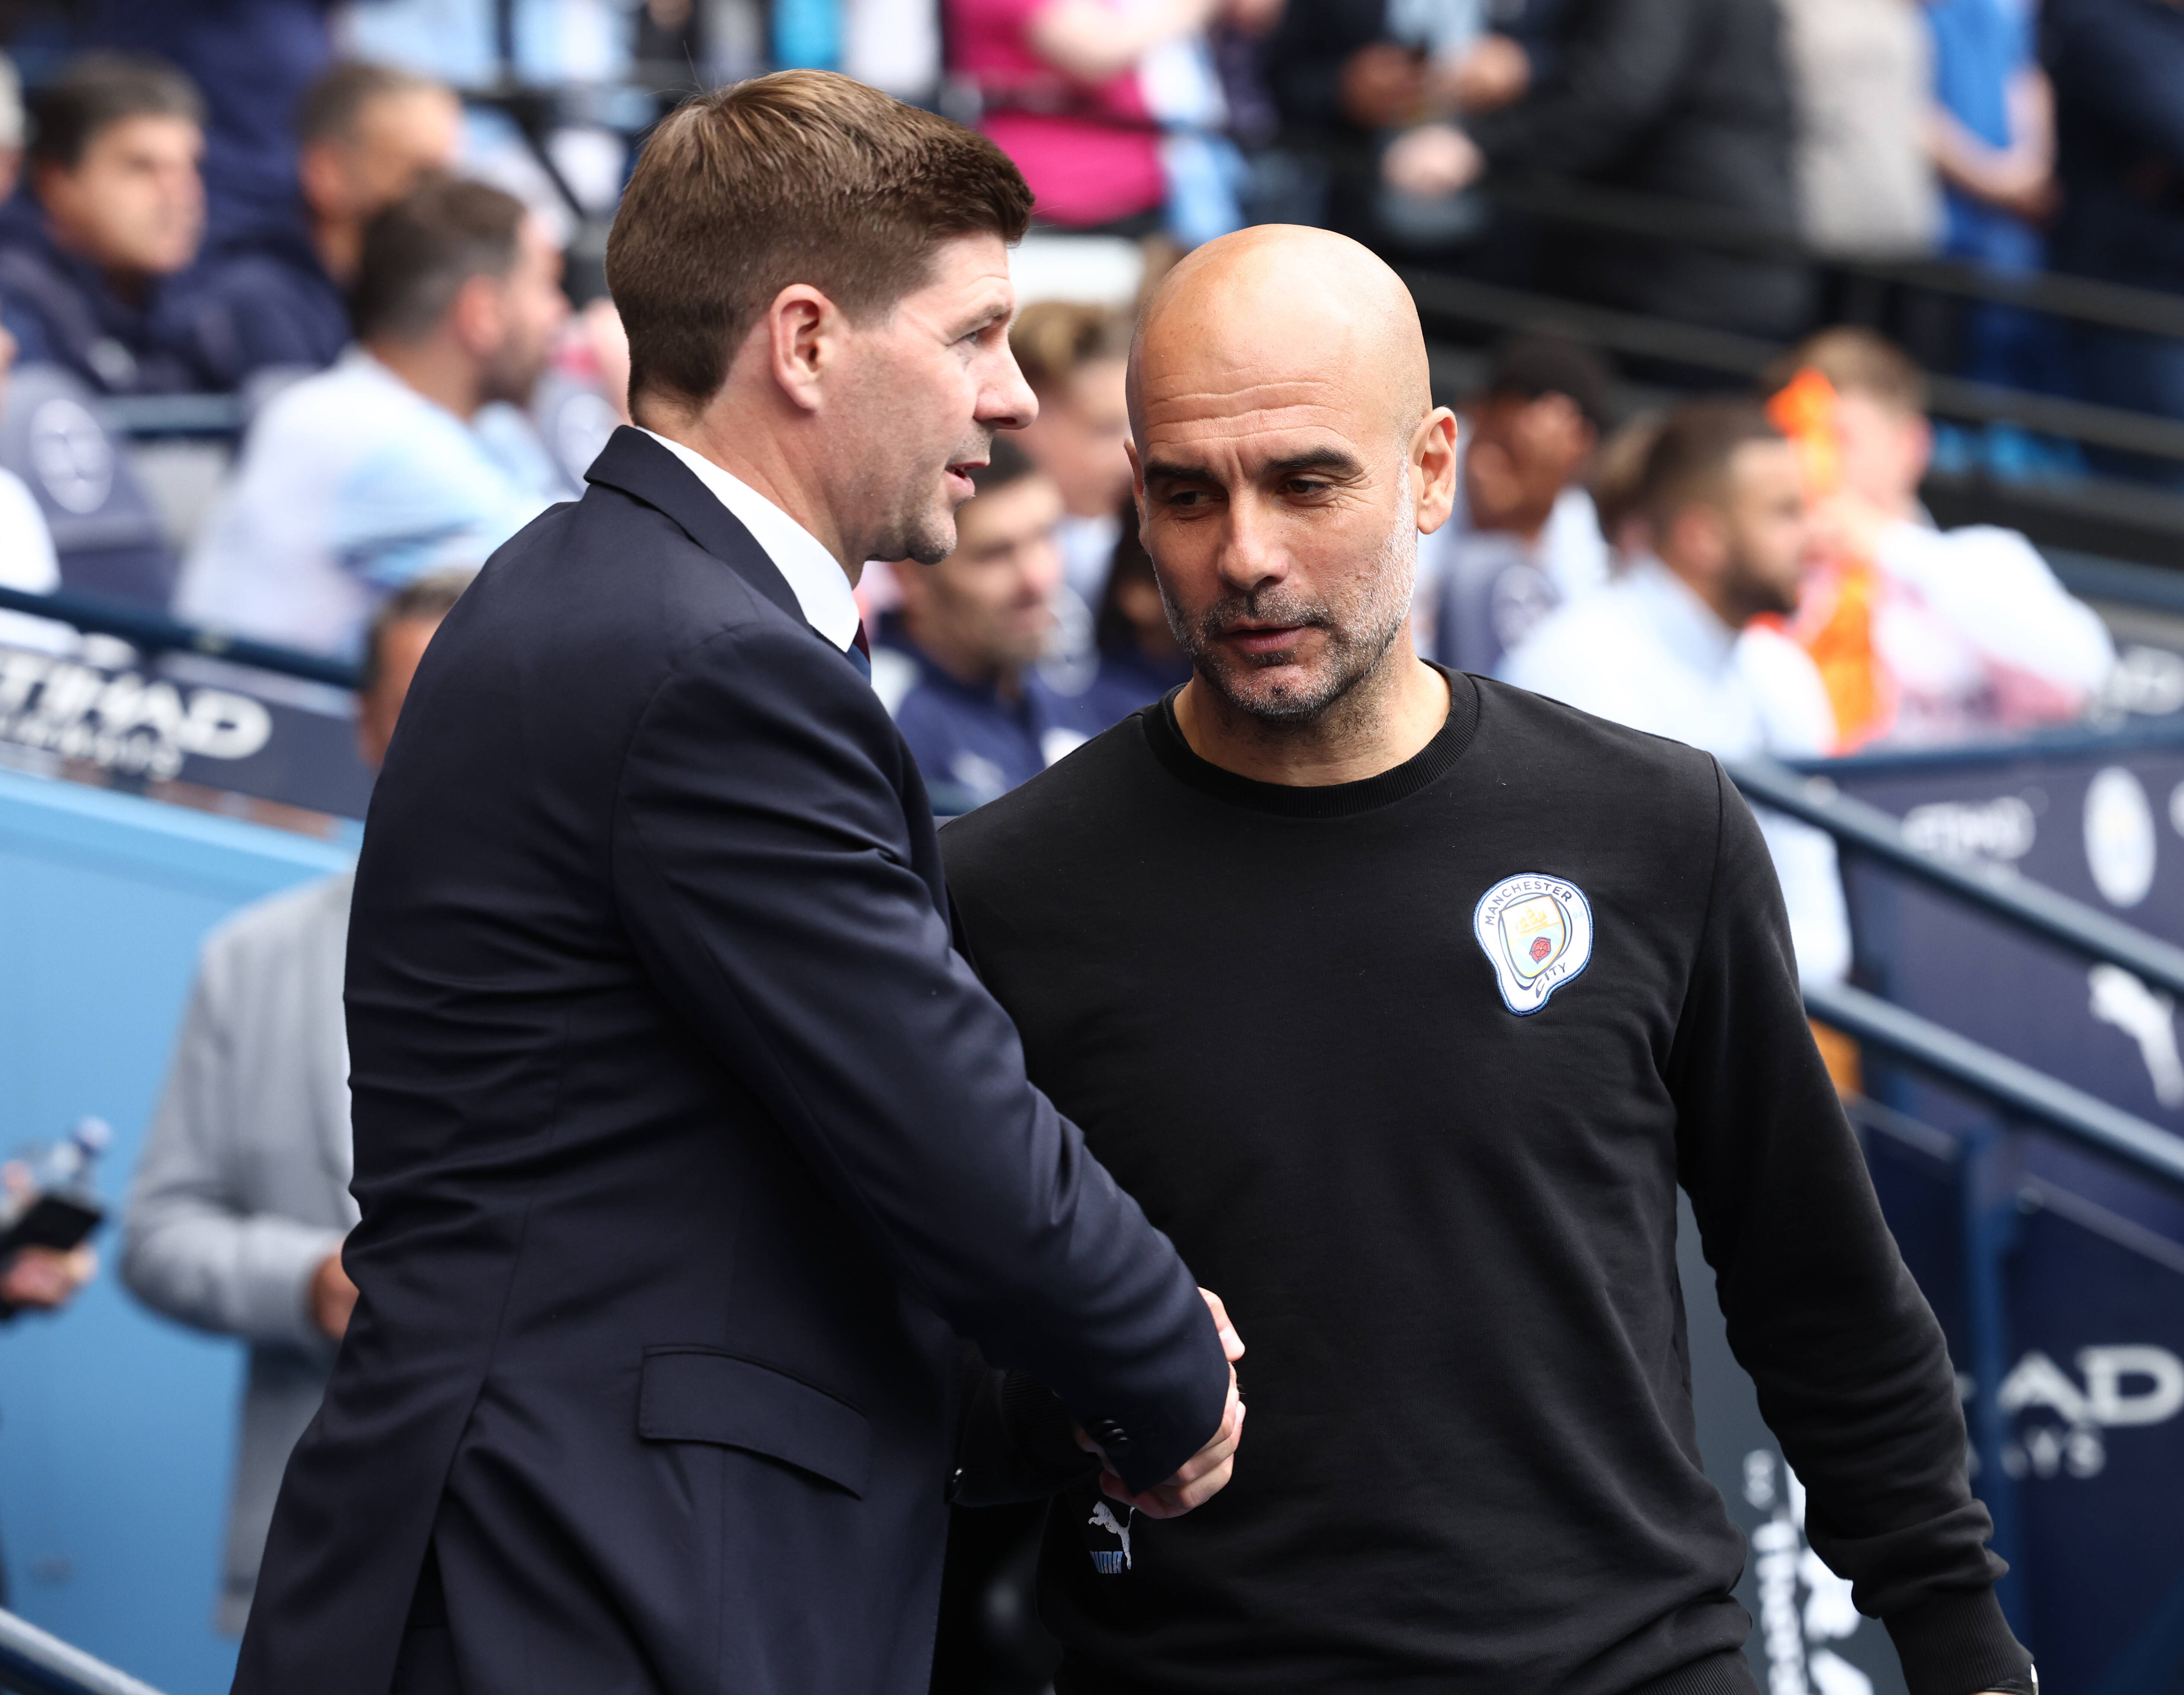 Aston Villa manager Steven Gerrard pictured (left) shaking hands with Manchester City boss Pep Guardiola ahead of their final match in the 2021/22 Premier League season